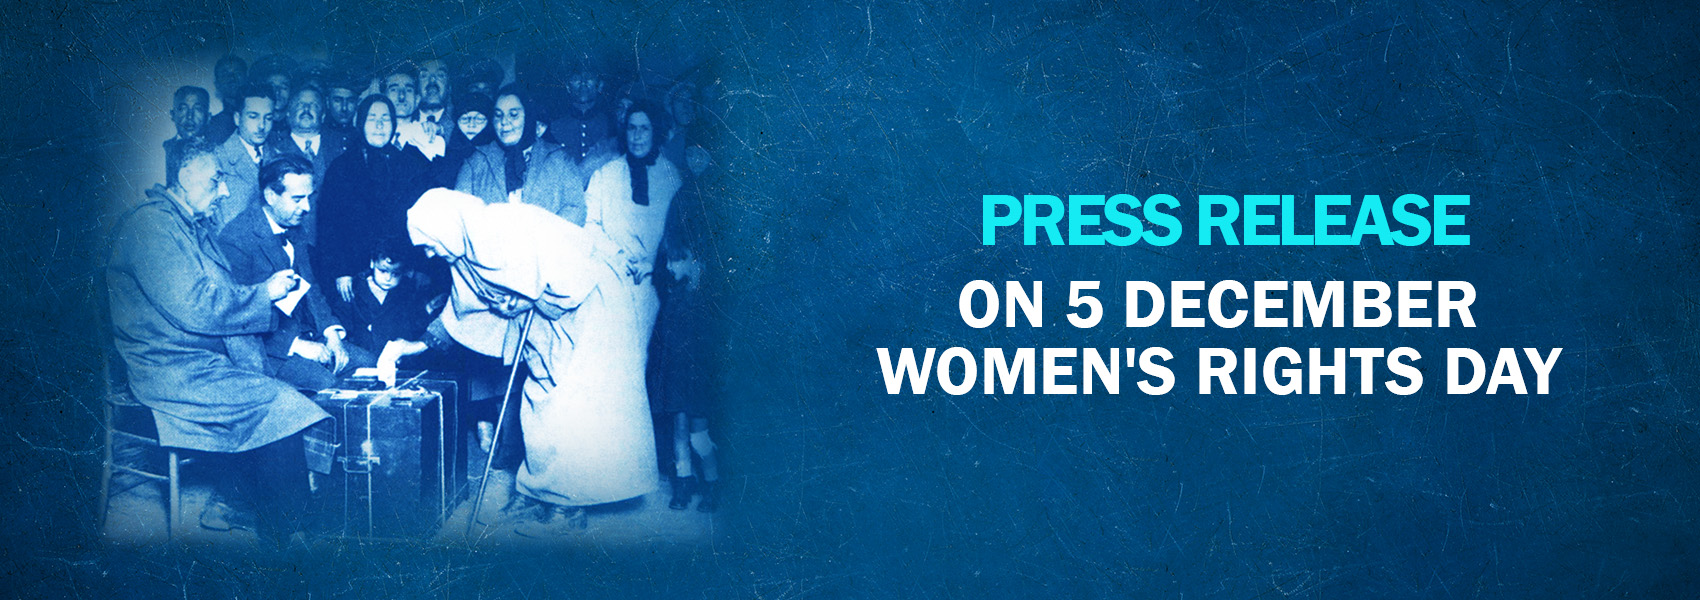 Press Release on 5 December Women's Rights Day 